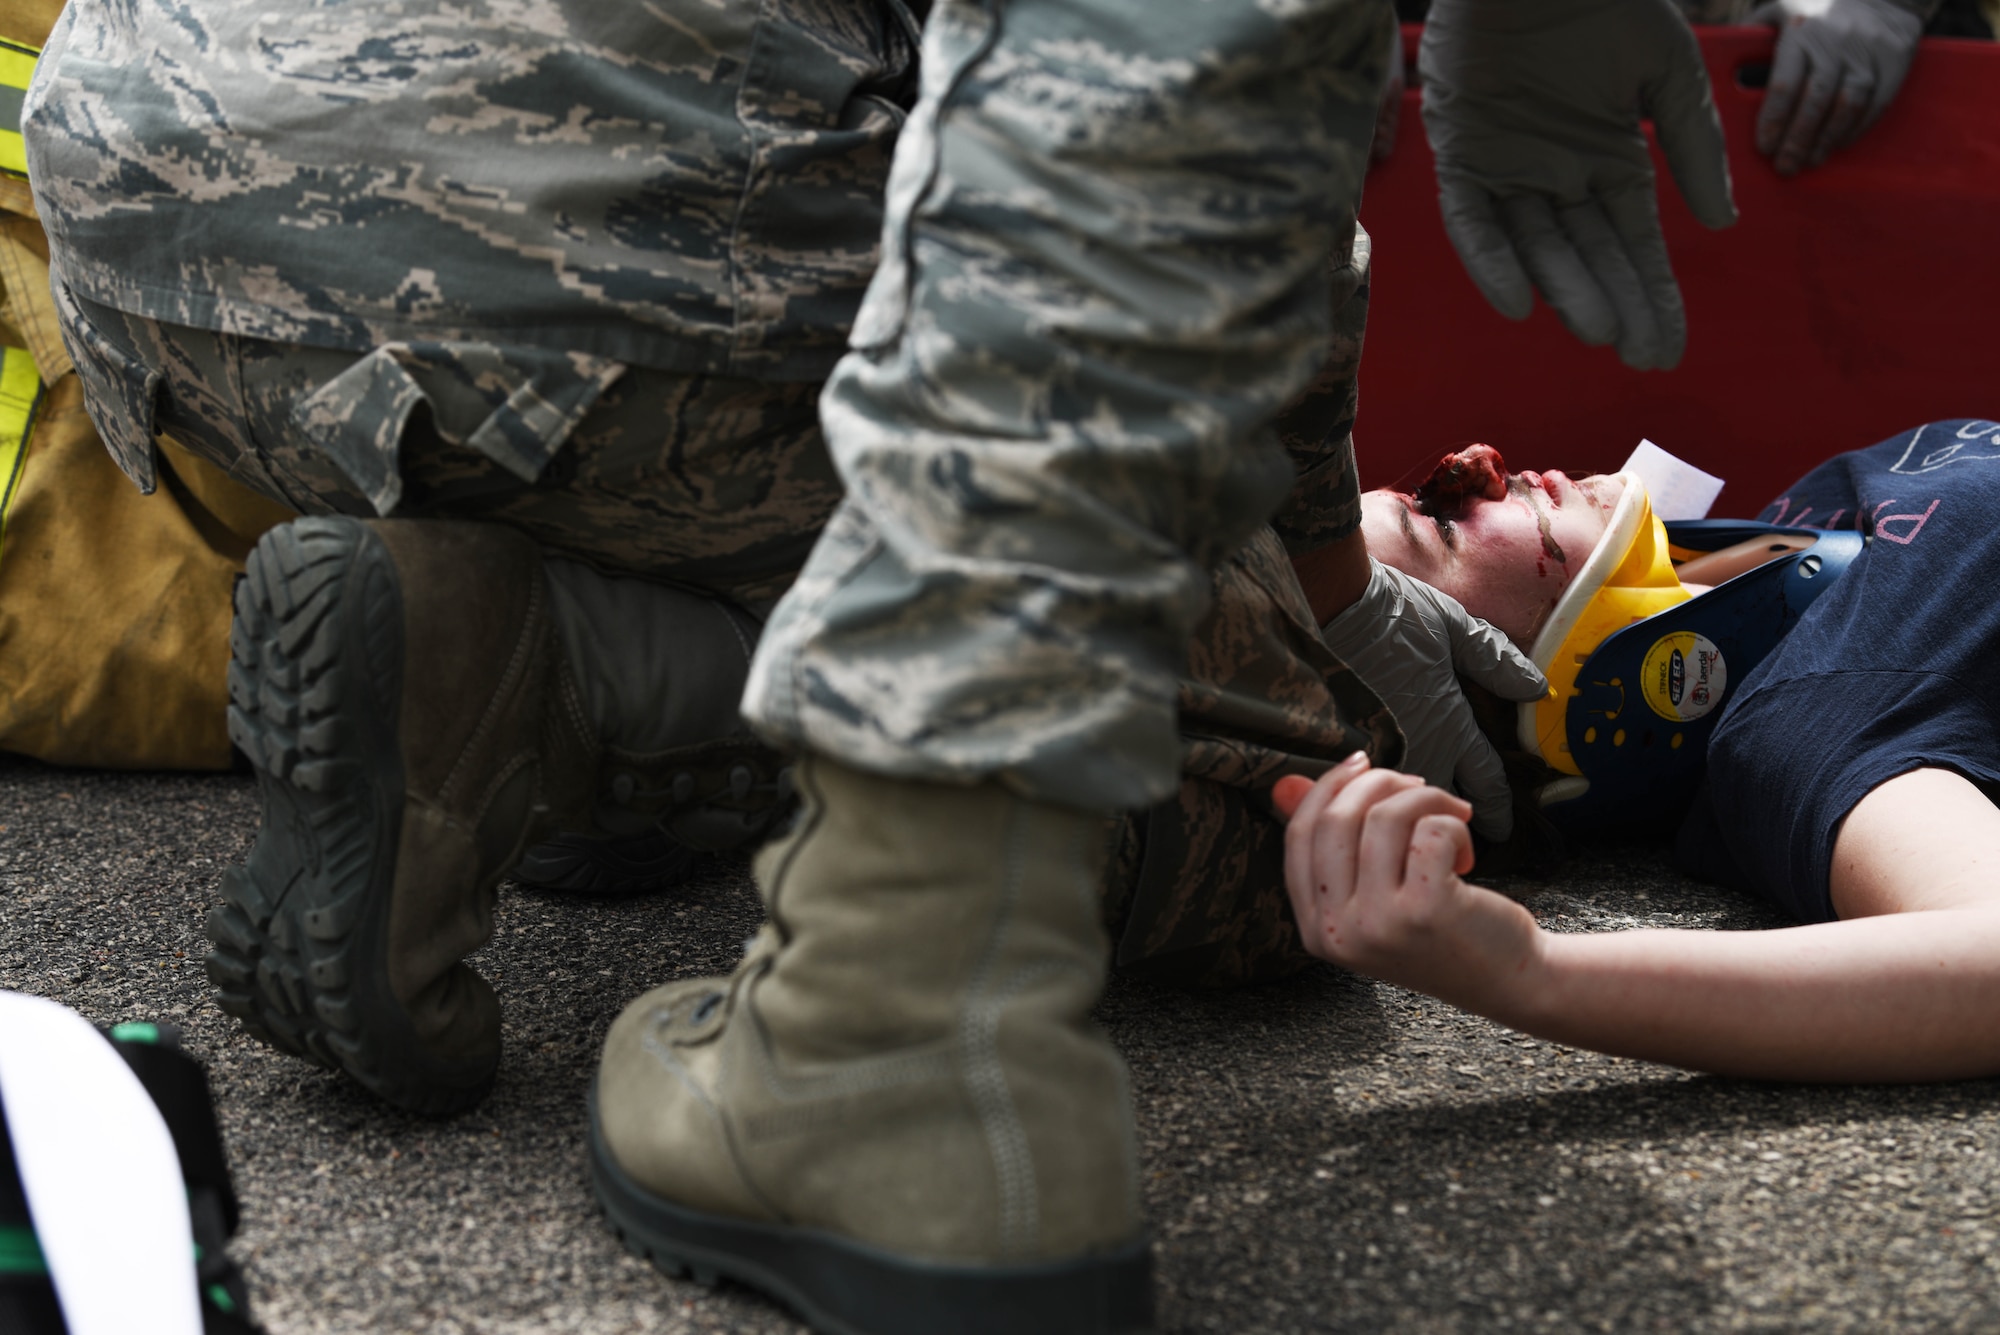 Ellsworth Air Force Base Airmen give medical treatment to a student after a simulated car accident during Freshman Impact at Douglas High School, Box Elder S.D., May 9, 2018. This event teaches young adults about the dangers of driving under the influence and distracted driving so they can make better decisions behind the wheel. (U.S.  Air Force photo by Airman 1st Class Thomas Karol)